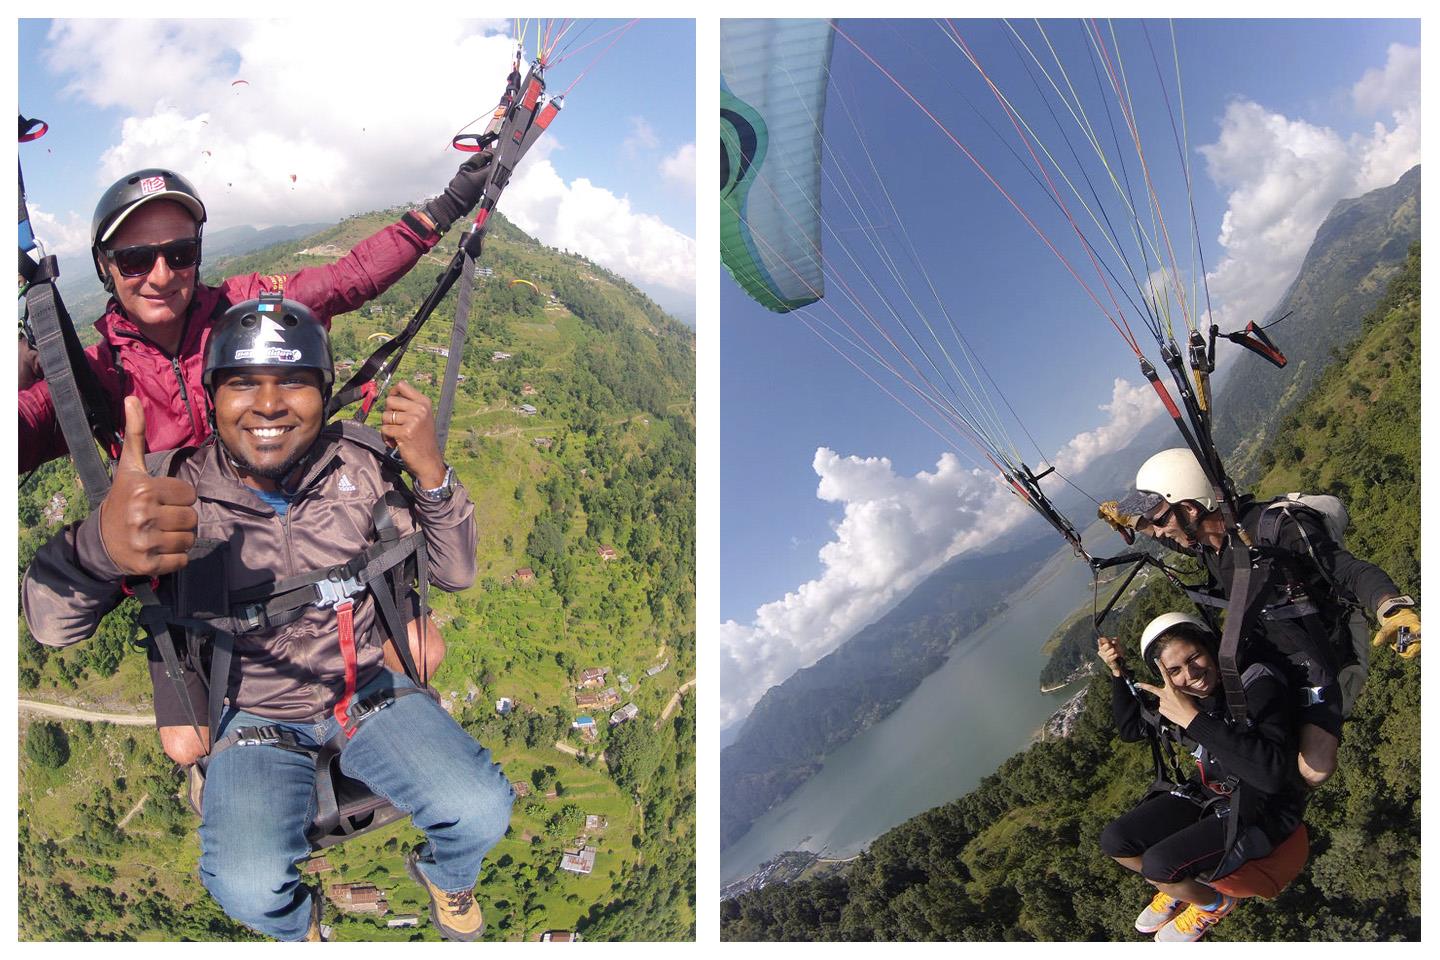 Day 4: Paragliding in Pokhara, Nepal